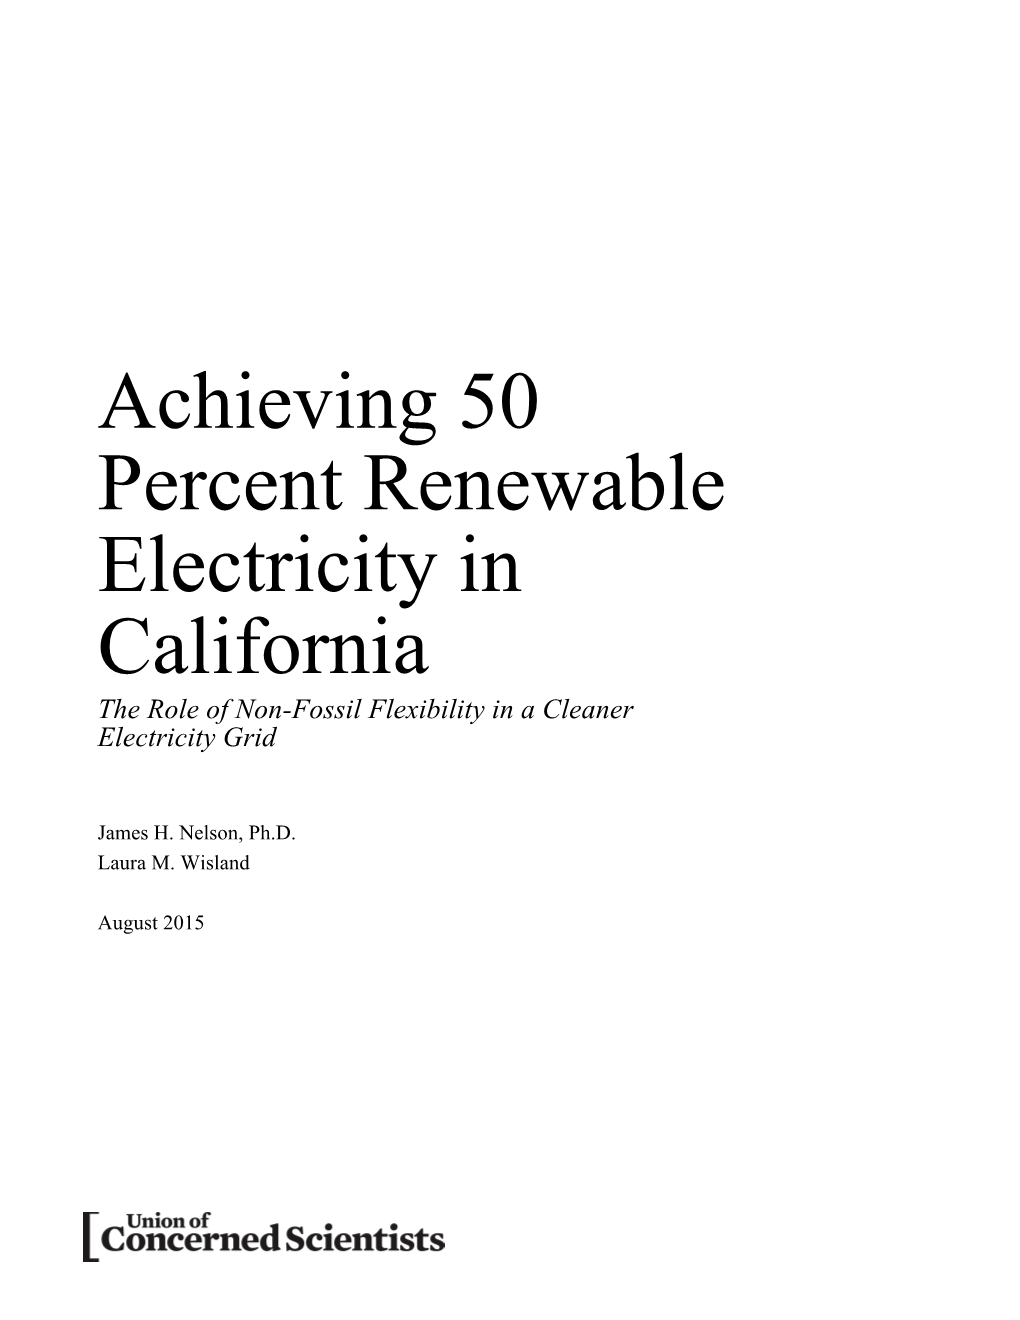 Achieving 50 Percent Renewable Electricity in California: the Role Of